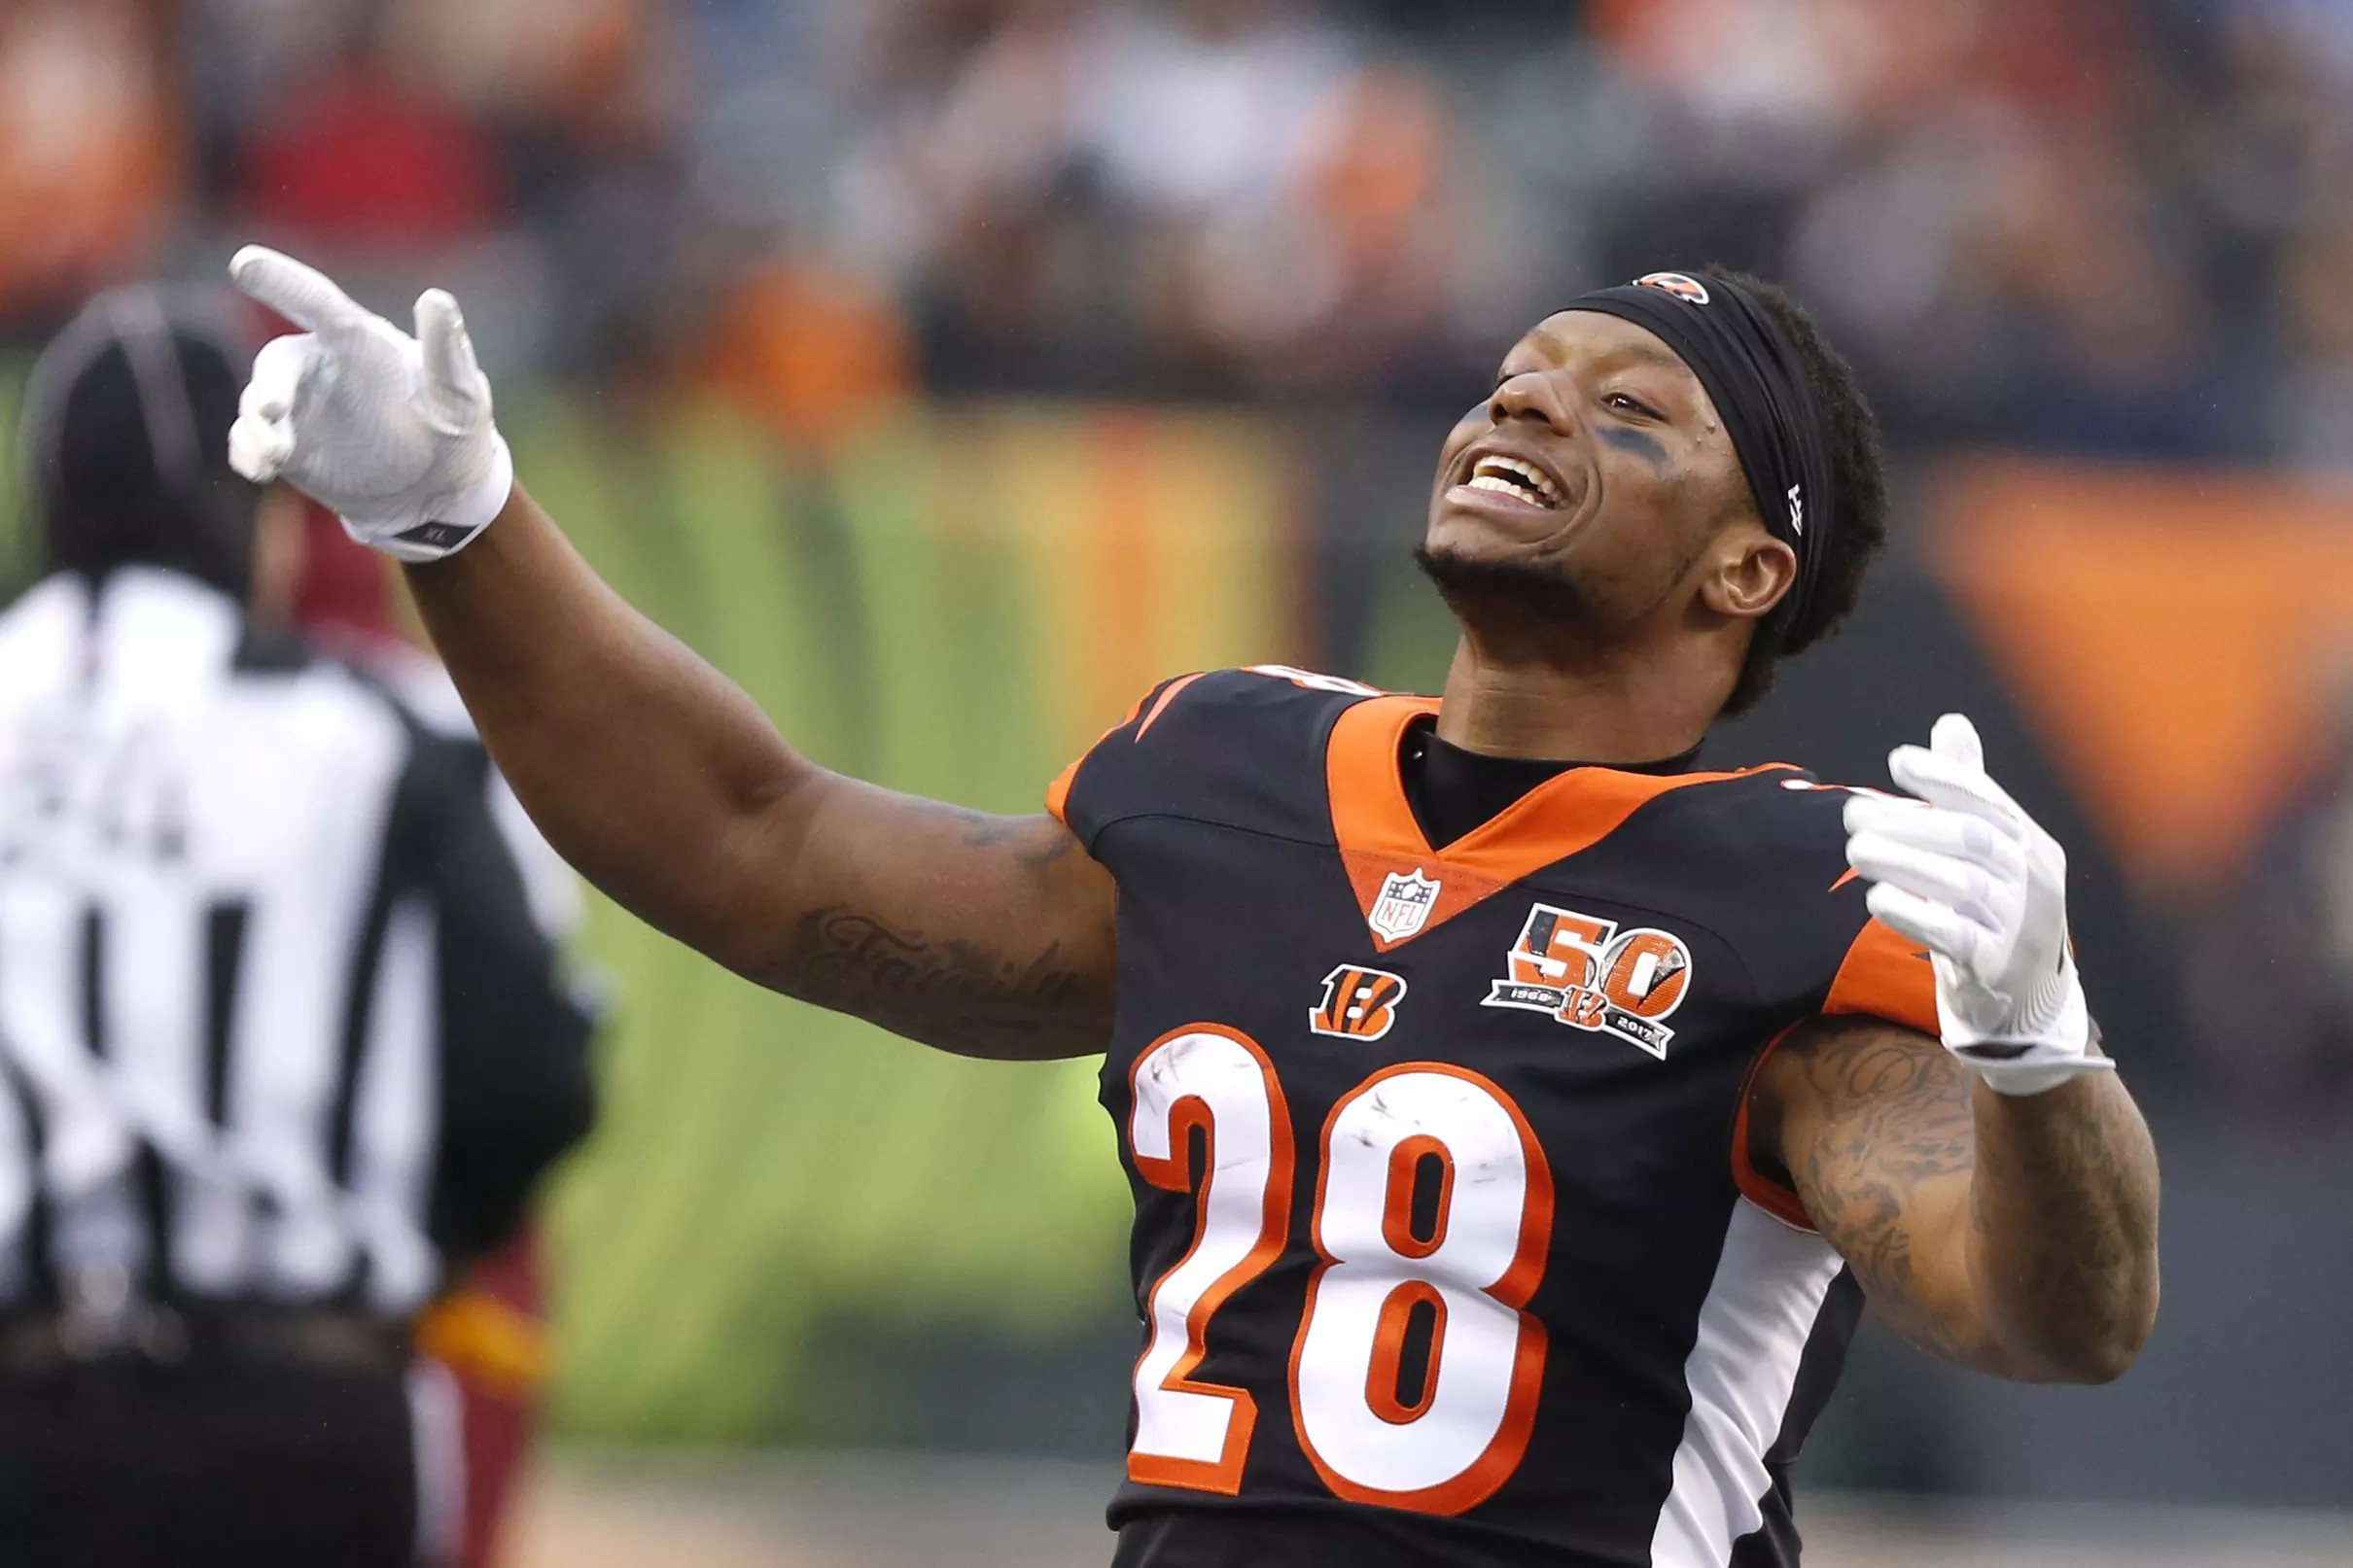 Joe Mixon will serve as Bengals' bell cow running back moving forward.